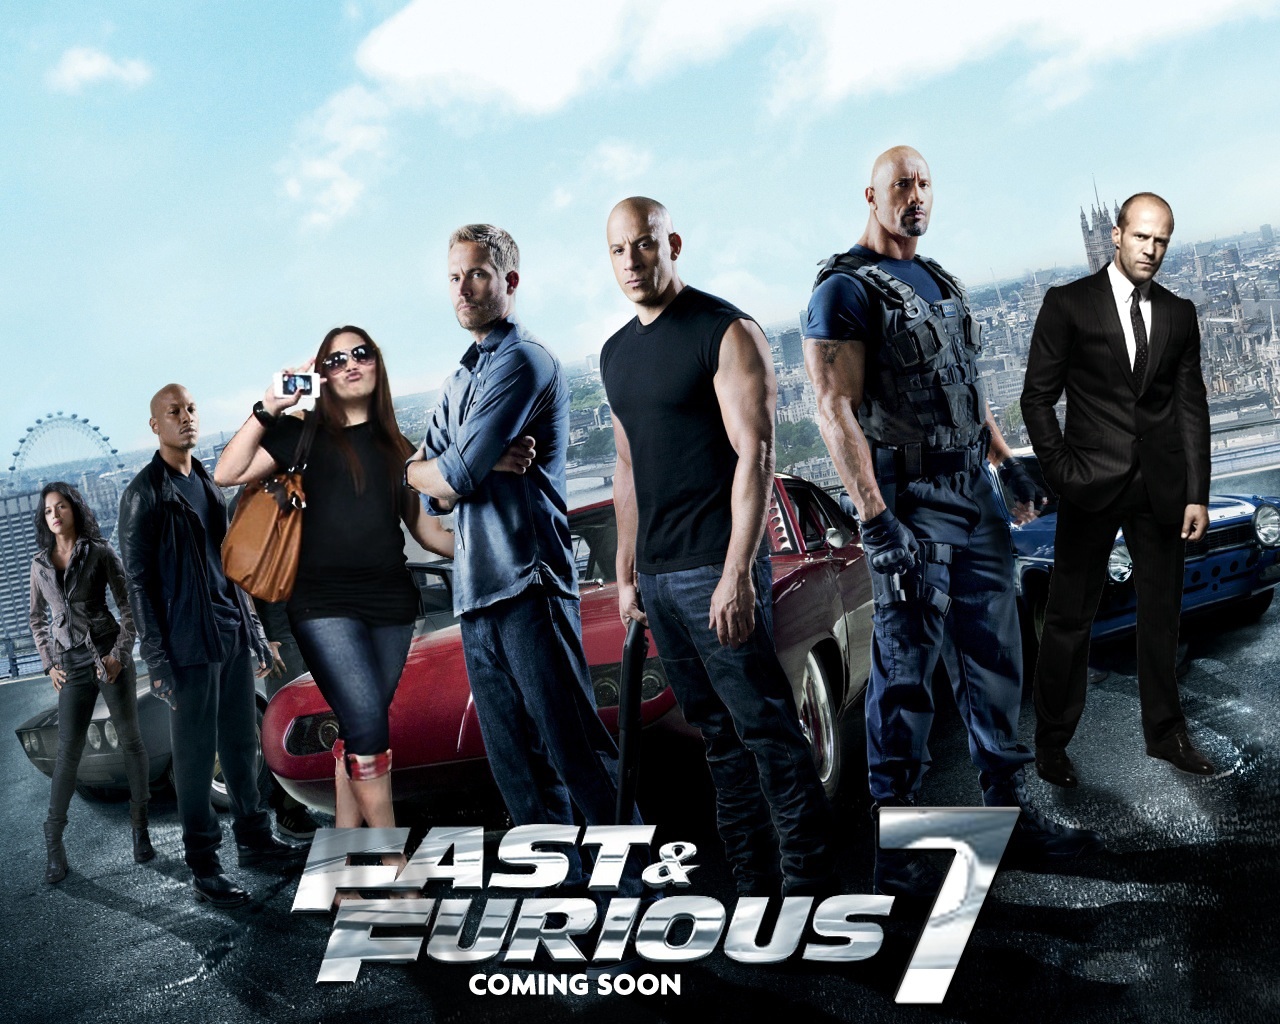 UNIVERSAL PICTURES PUSHES ‘FAST AND FURIOUS 7’ RELEASE DATE